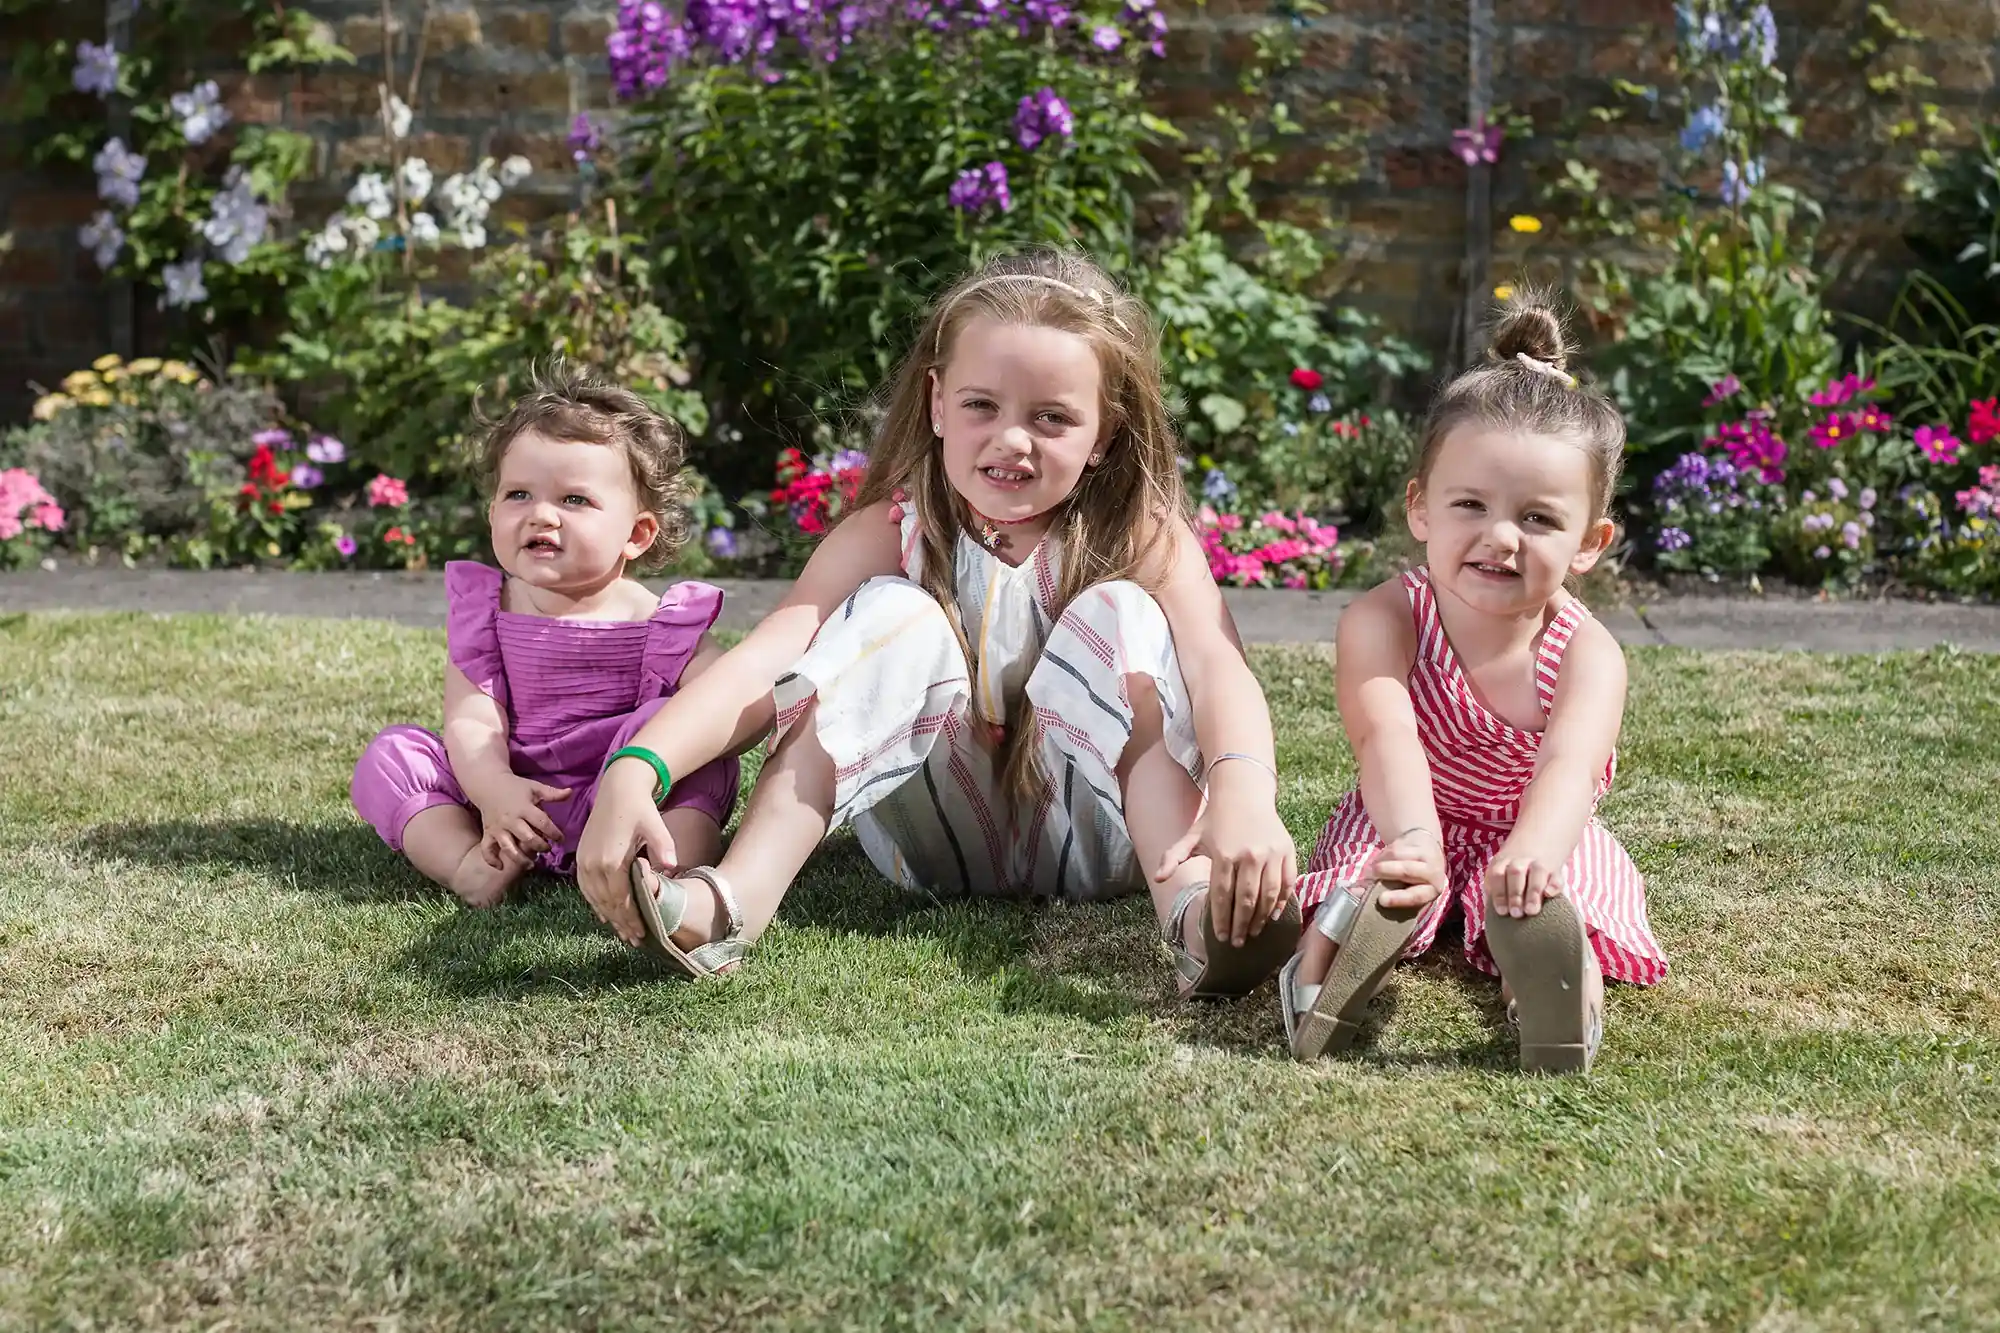 Three young children sit on grass in a garden with colorful flowers in the background, smiling at the camera. Two of them are wearing striped dresses, and one is in a purple outfit.